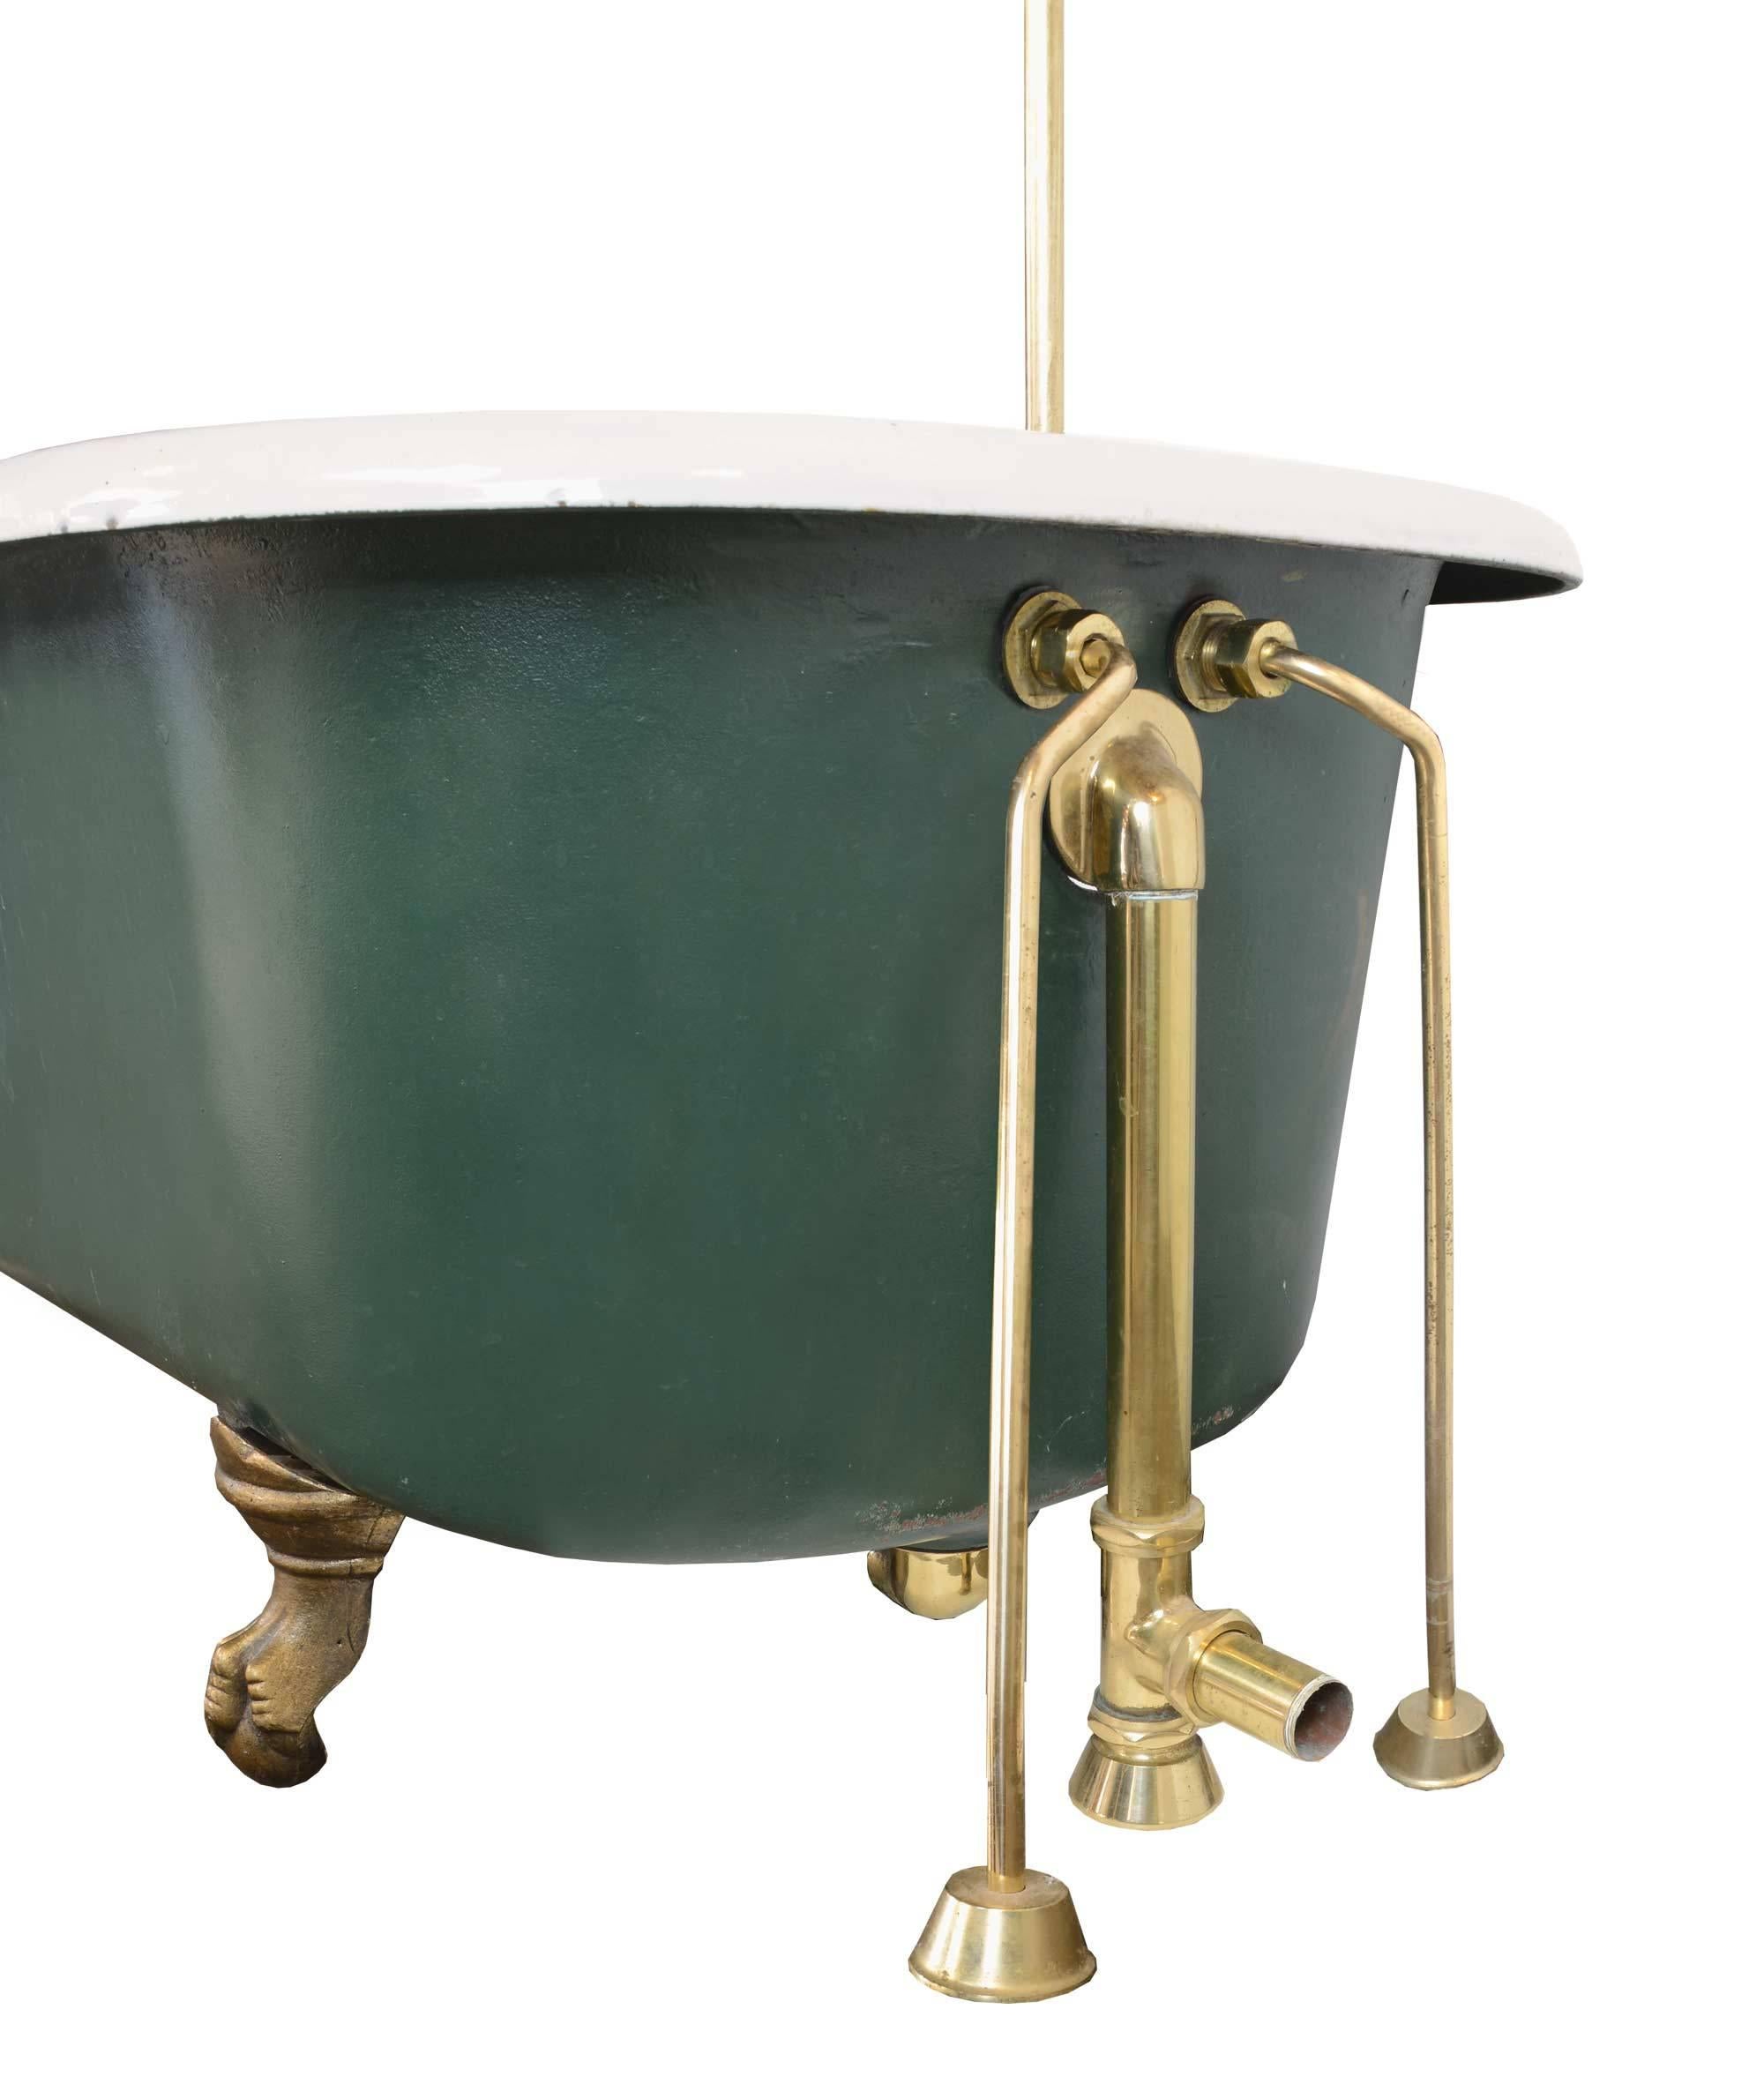 Five foot forest green cast iron bathtub with decorative claw feet and brass-plated hardware, including original faucet and handles, soap dish, and shower curtain rod with ceiling mount. 

Measurements:
Overall: 100